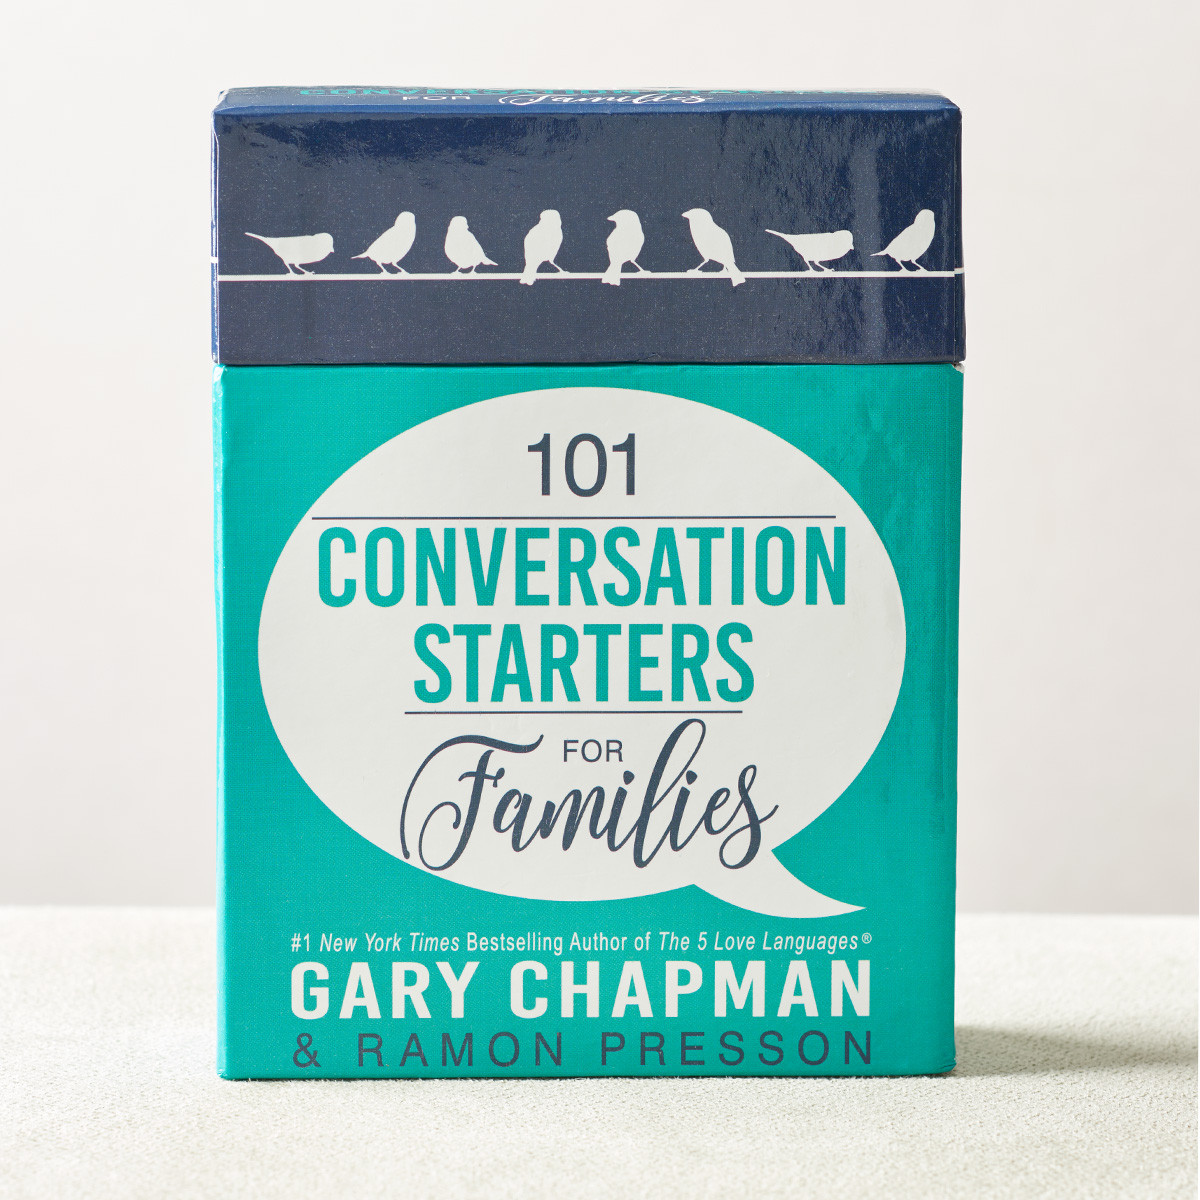 101 Conversation Starters For Families at Cru Media Ministry in Singapore